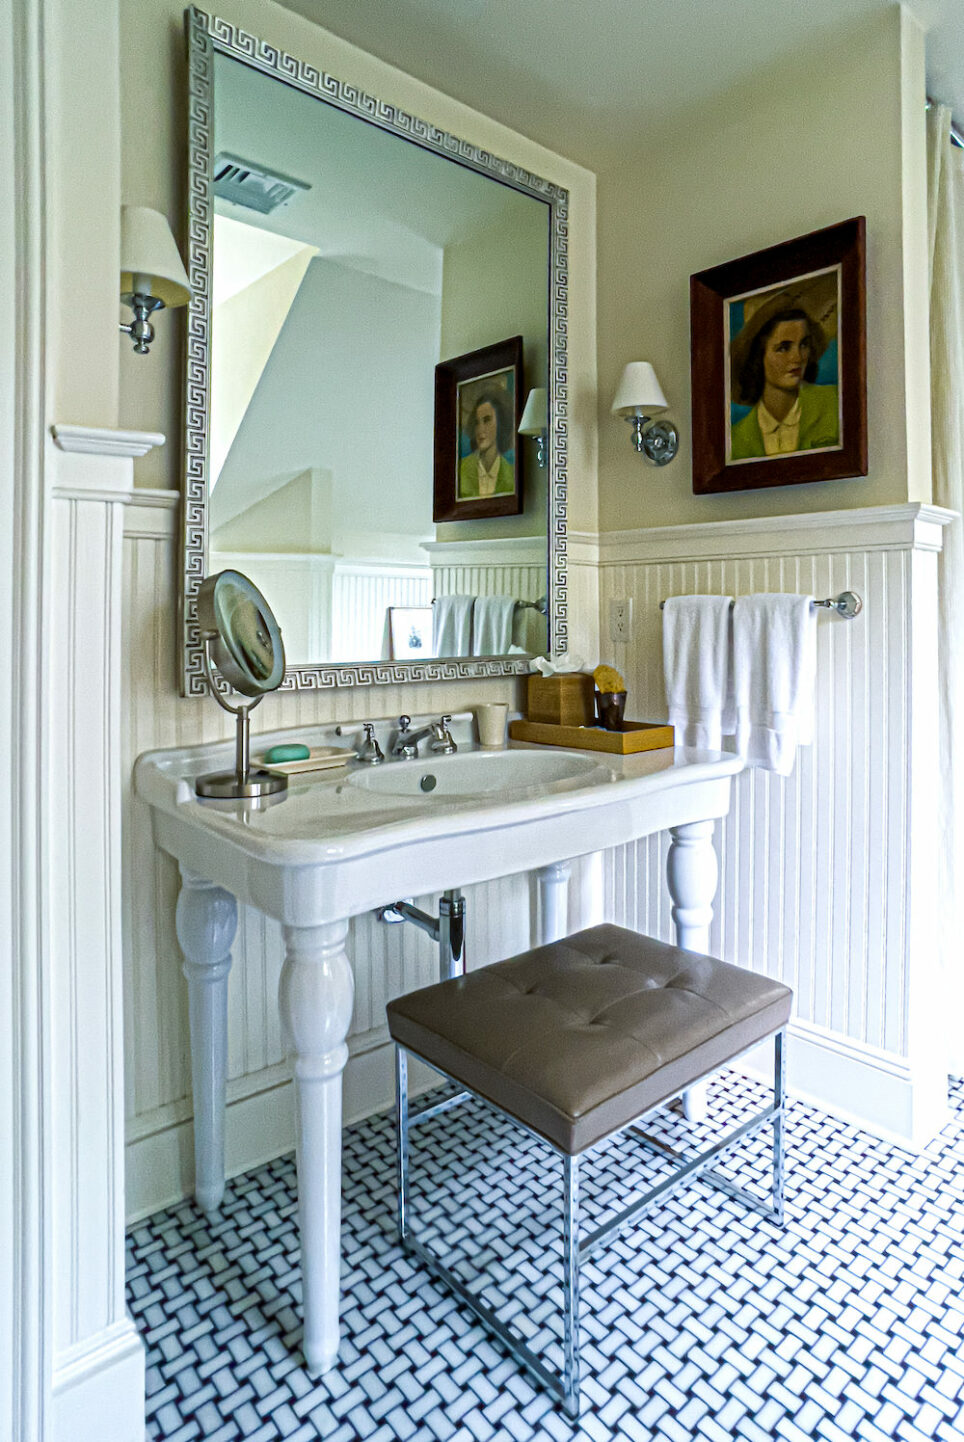 Bathroom in Bruce Glickman and Wilson Henley's Connecticut home via Quintessence